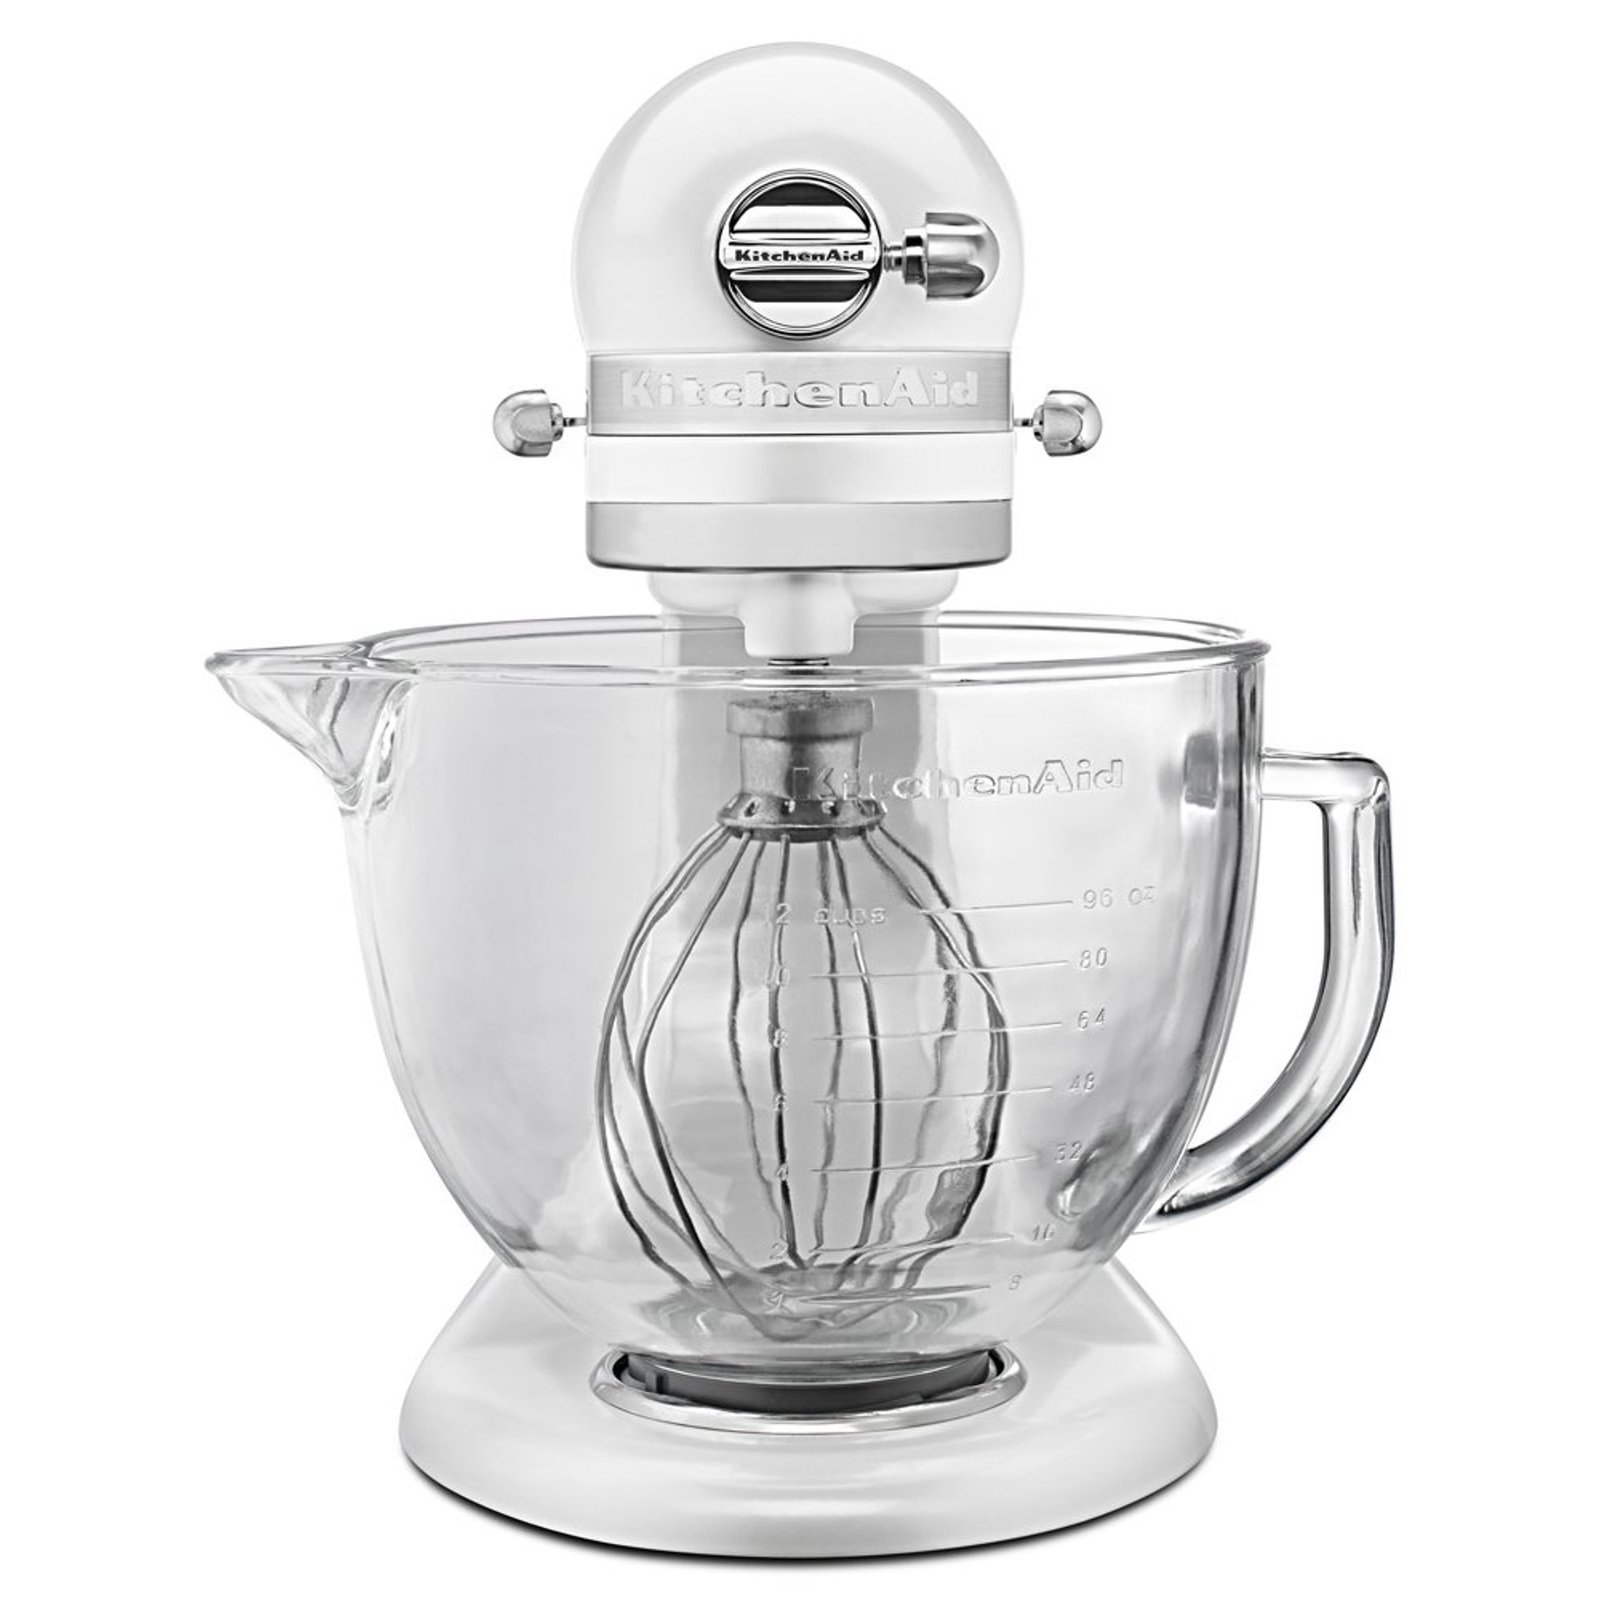 https://themarketdepot.com/wp-content/uploads/2023/01/KitchenAid-KSM155GBFP-5-Qt.-Artisan-Design-Series-with-Glass-Bowl-Frosted-Pearl-White-3.jpeg